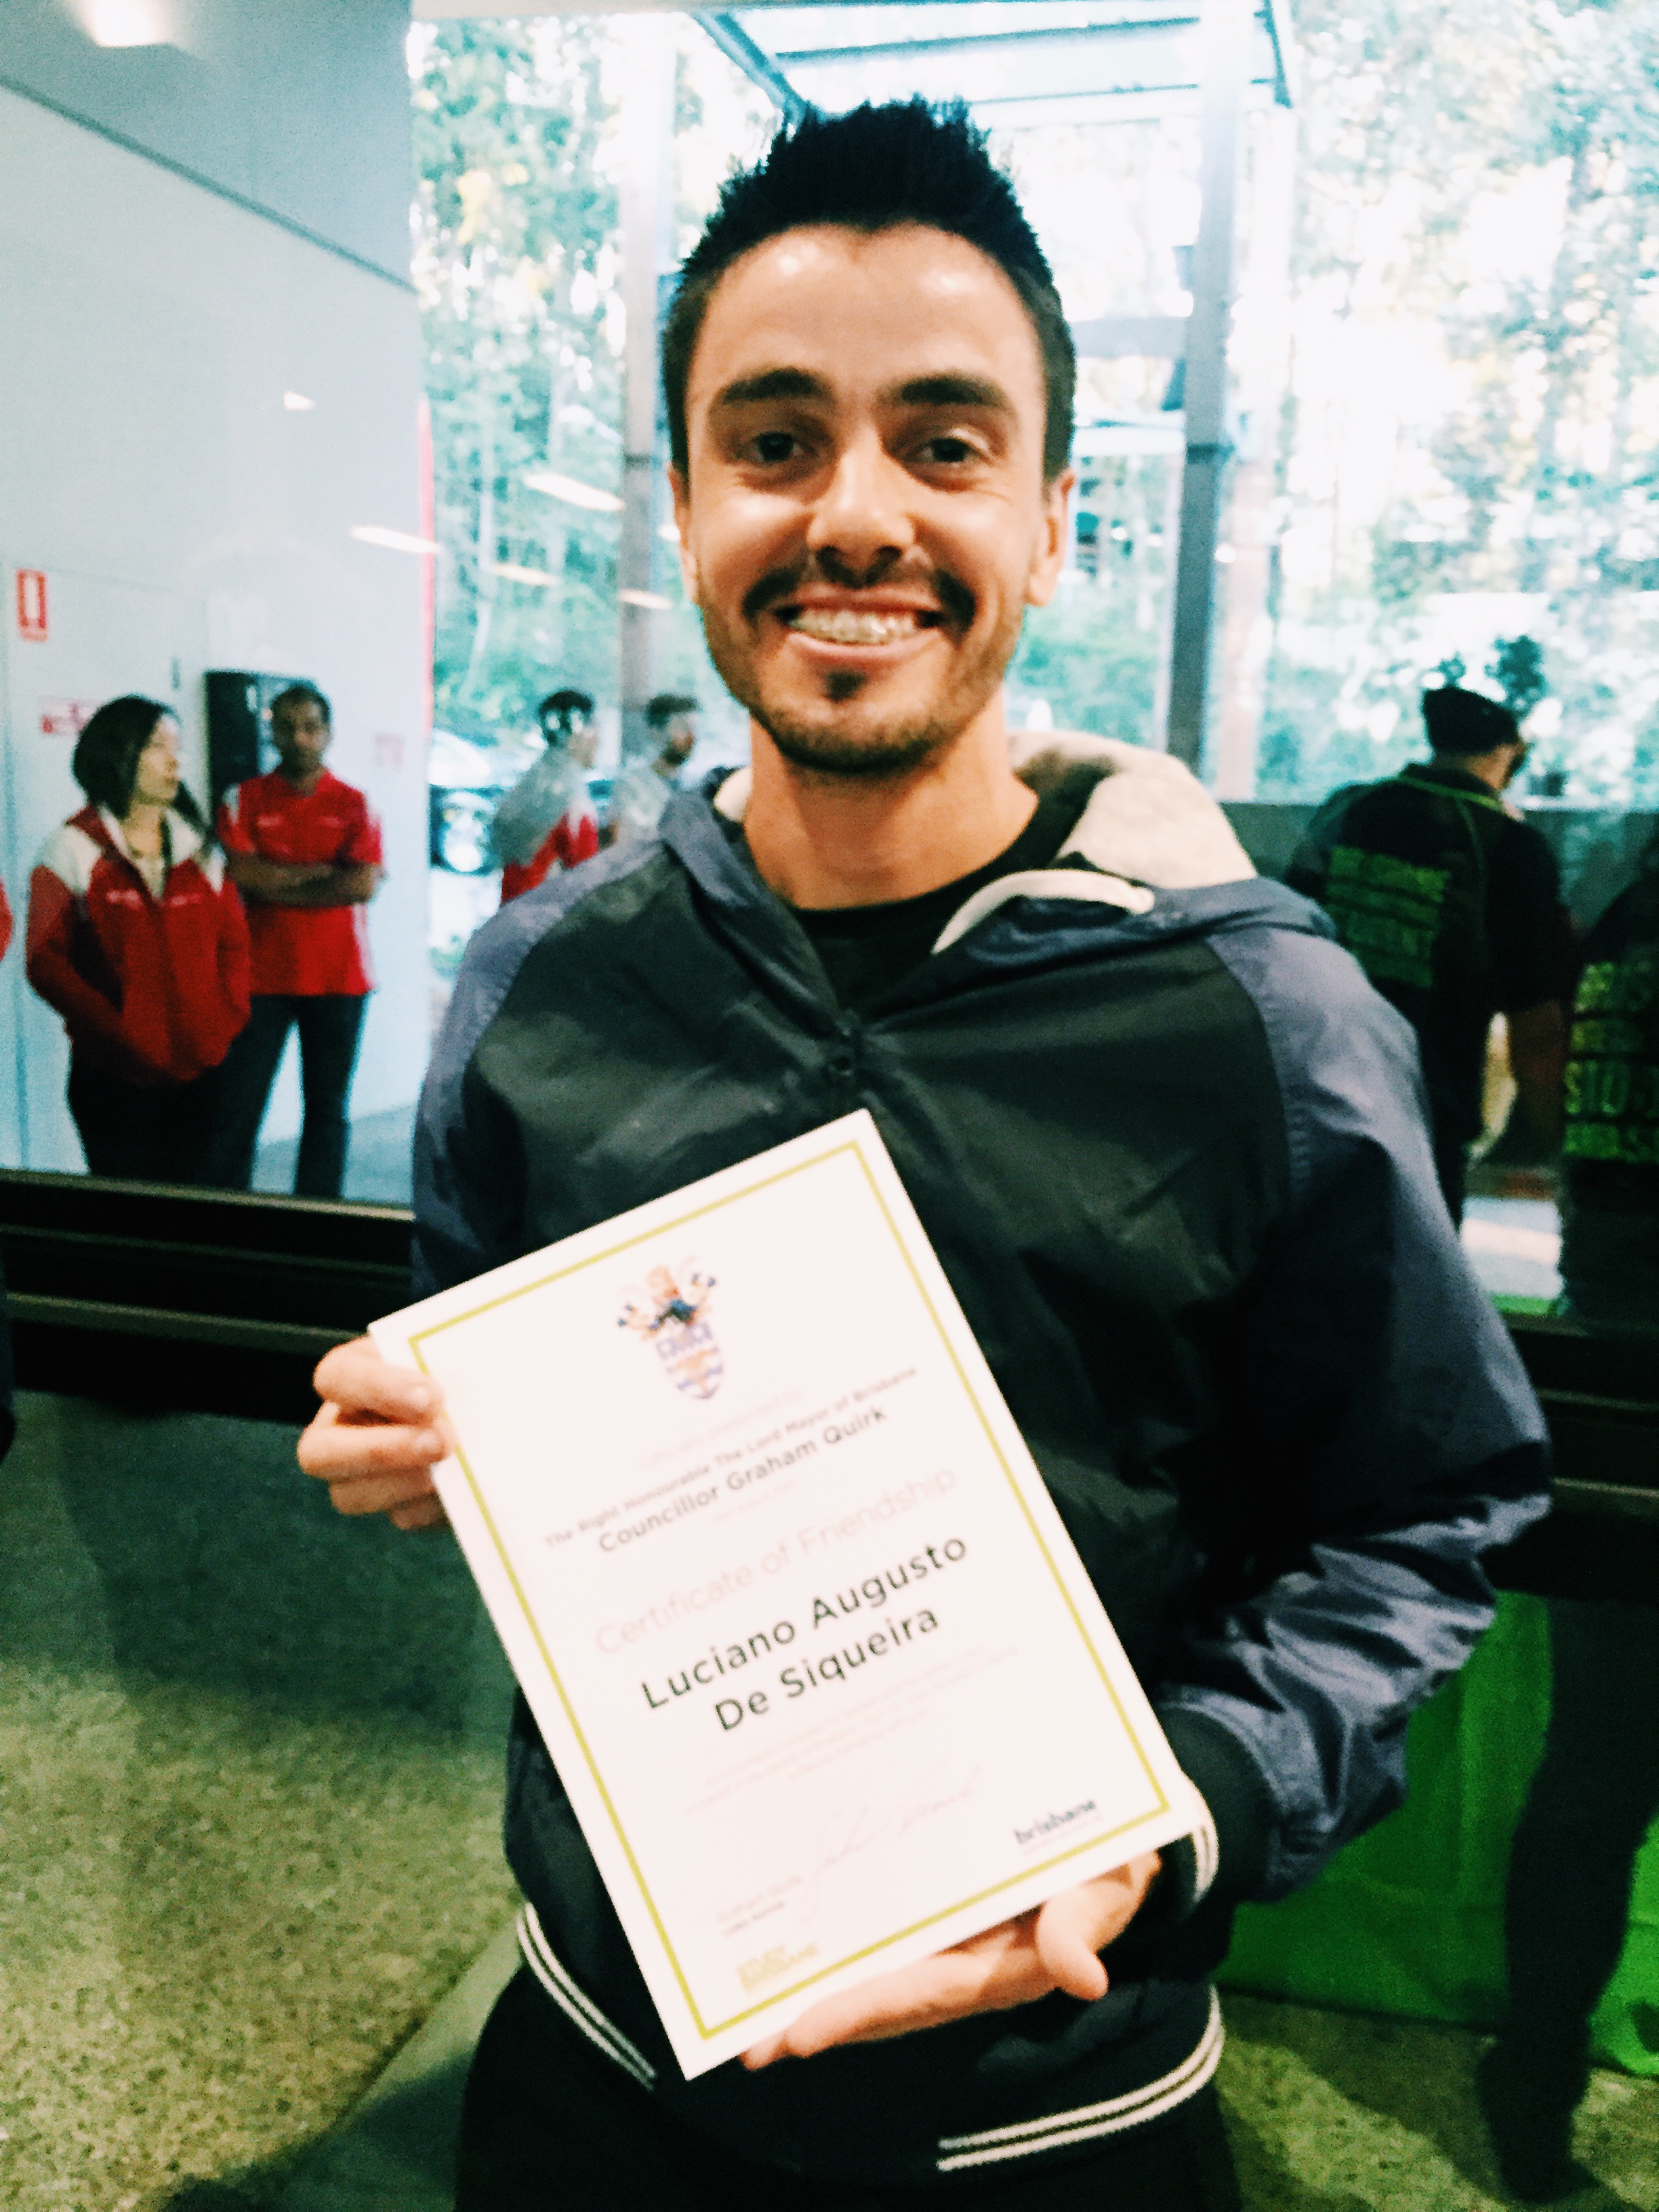 Brazilian I.T student, Luciano Augusto happy to receive a hand in friendship